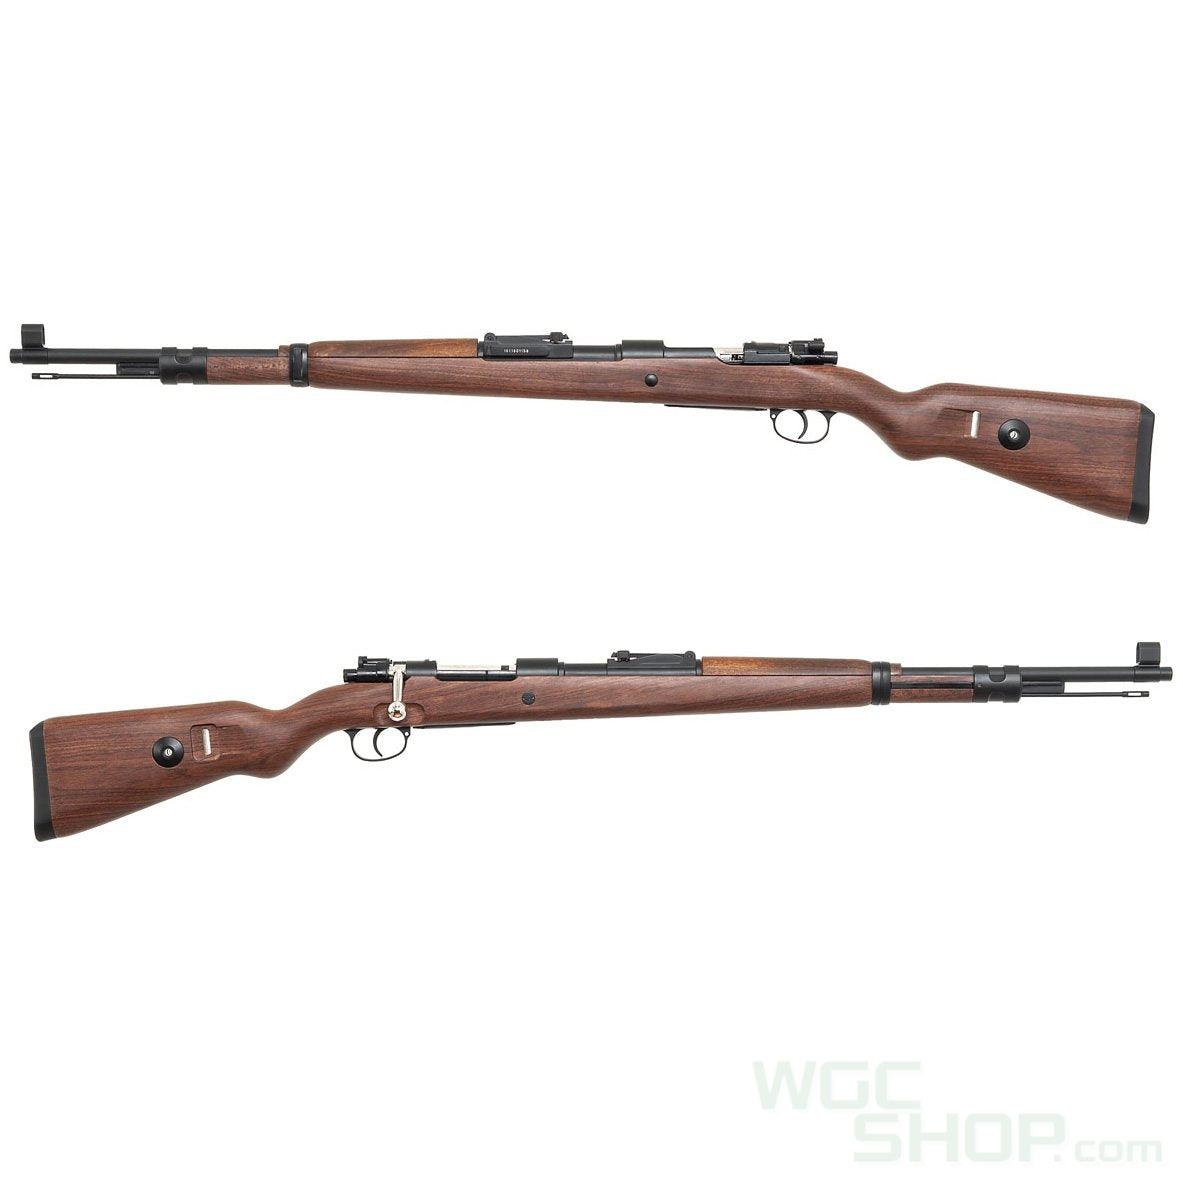 DOUBLE BELL 98K Spring Airsoft - GN-101 / Faux Wood - WGC Shop